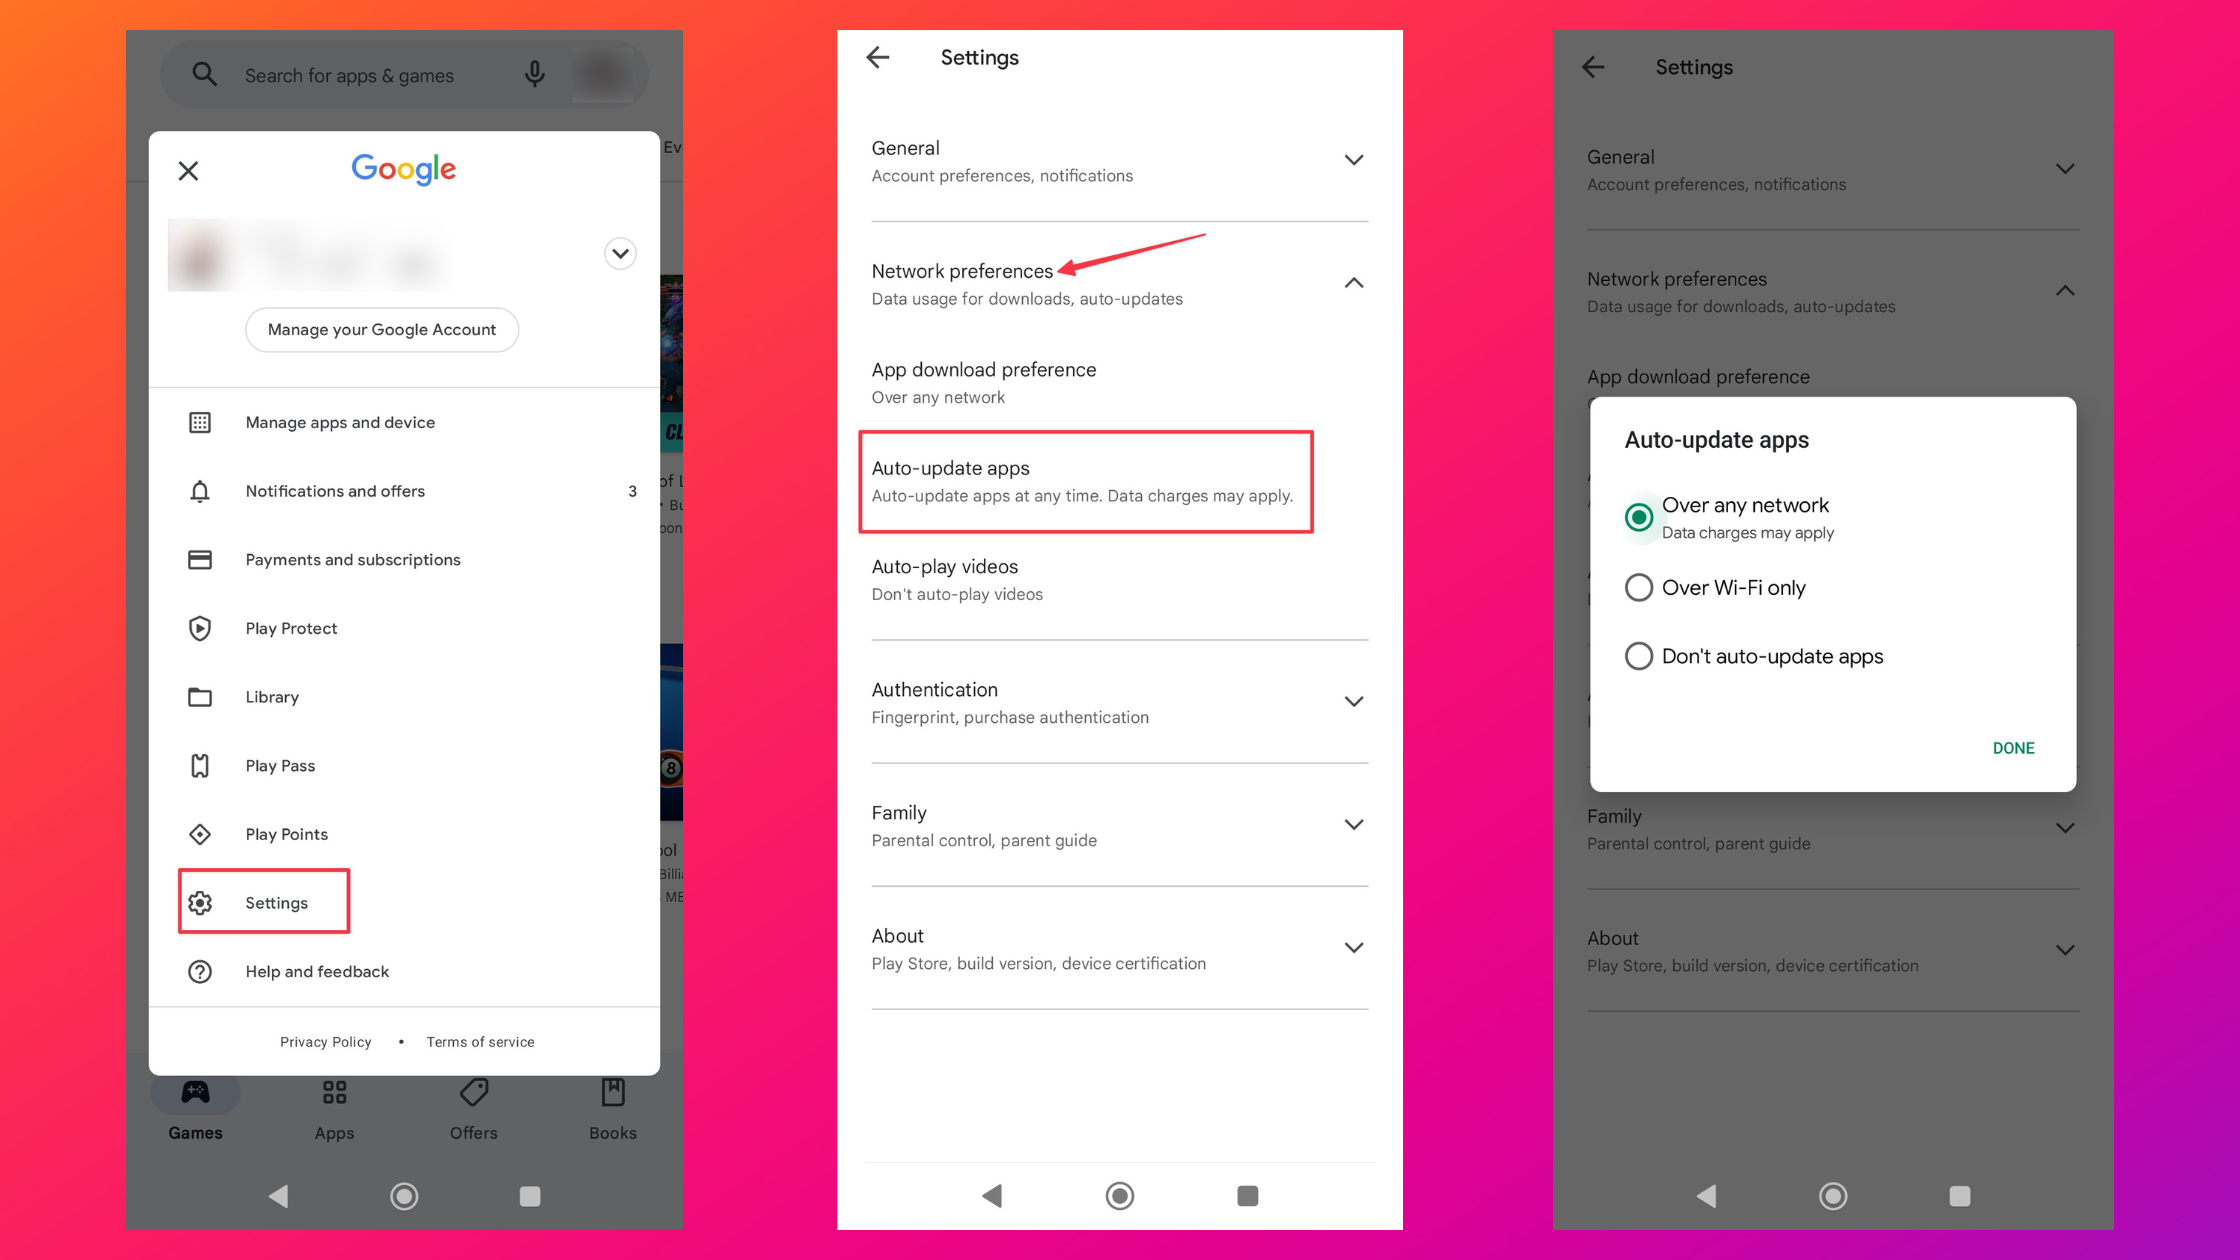 Remote.tools shows how to enable auto updates on Android